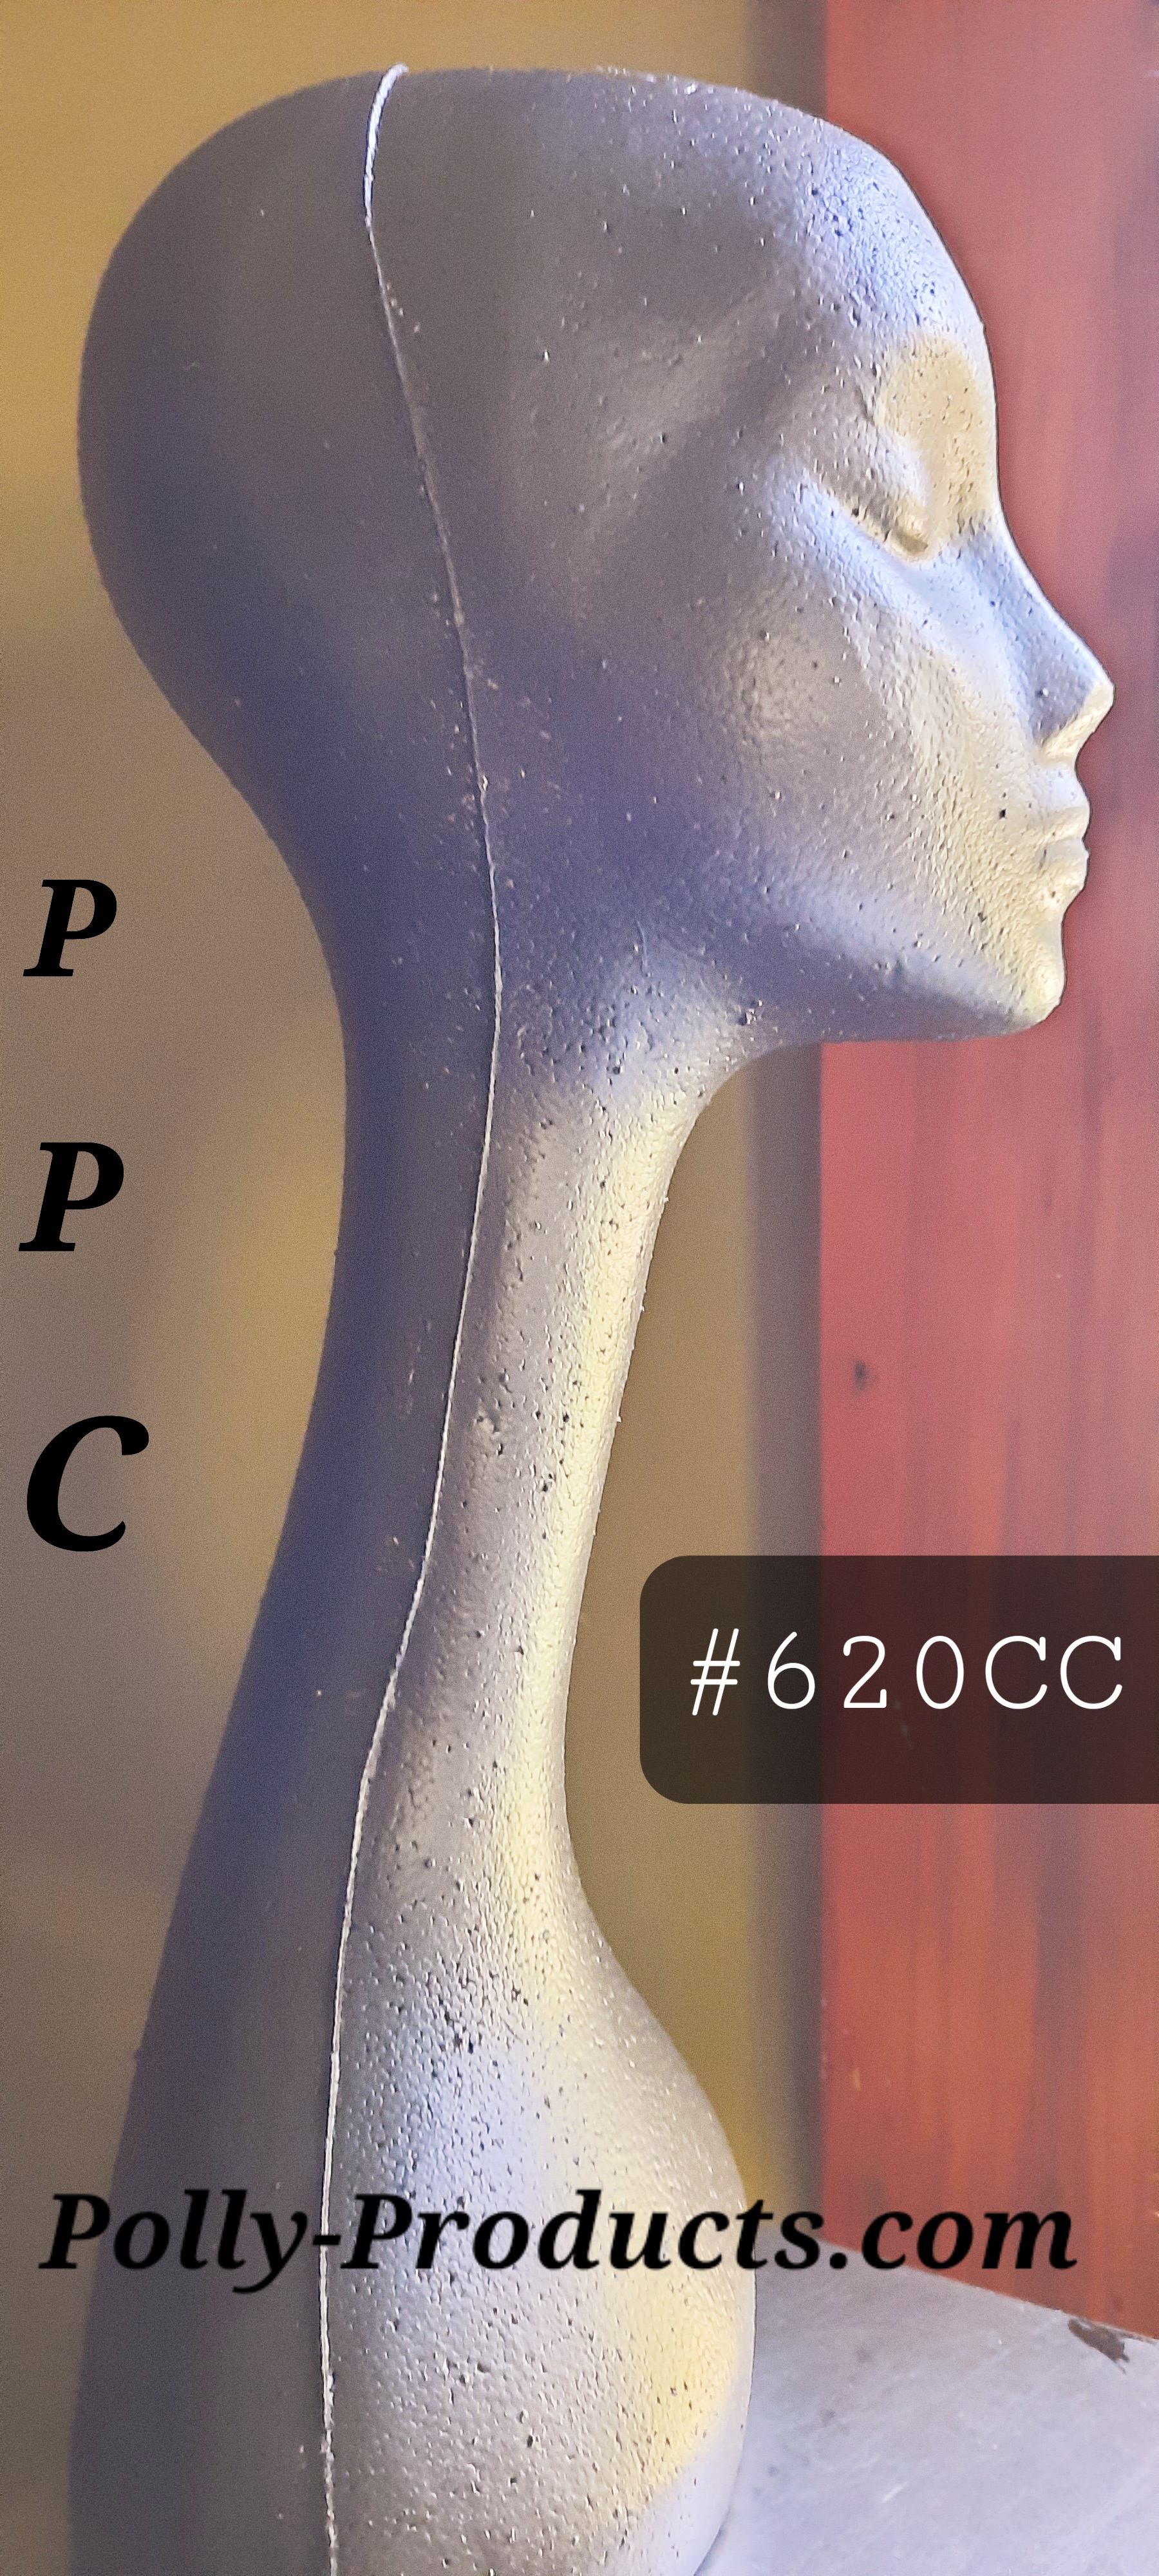 POLLY PRODUCTS LONG NECK MANNEQUIN HEADS #620CC 19"H COLOR-COATED BLACK AND MANY MORE COLOR OPTIONS